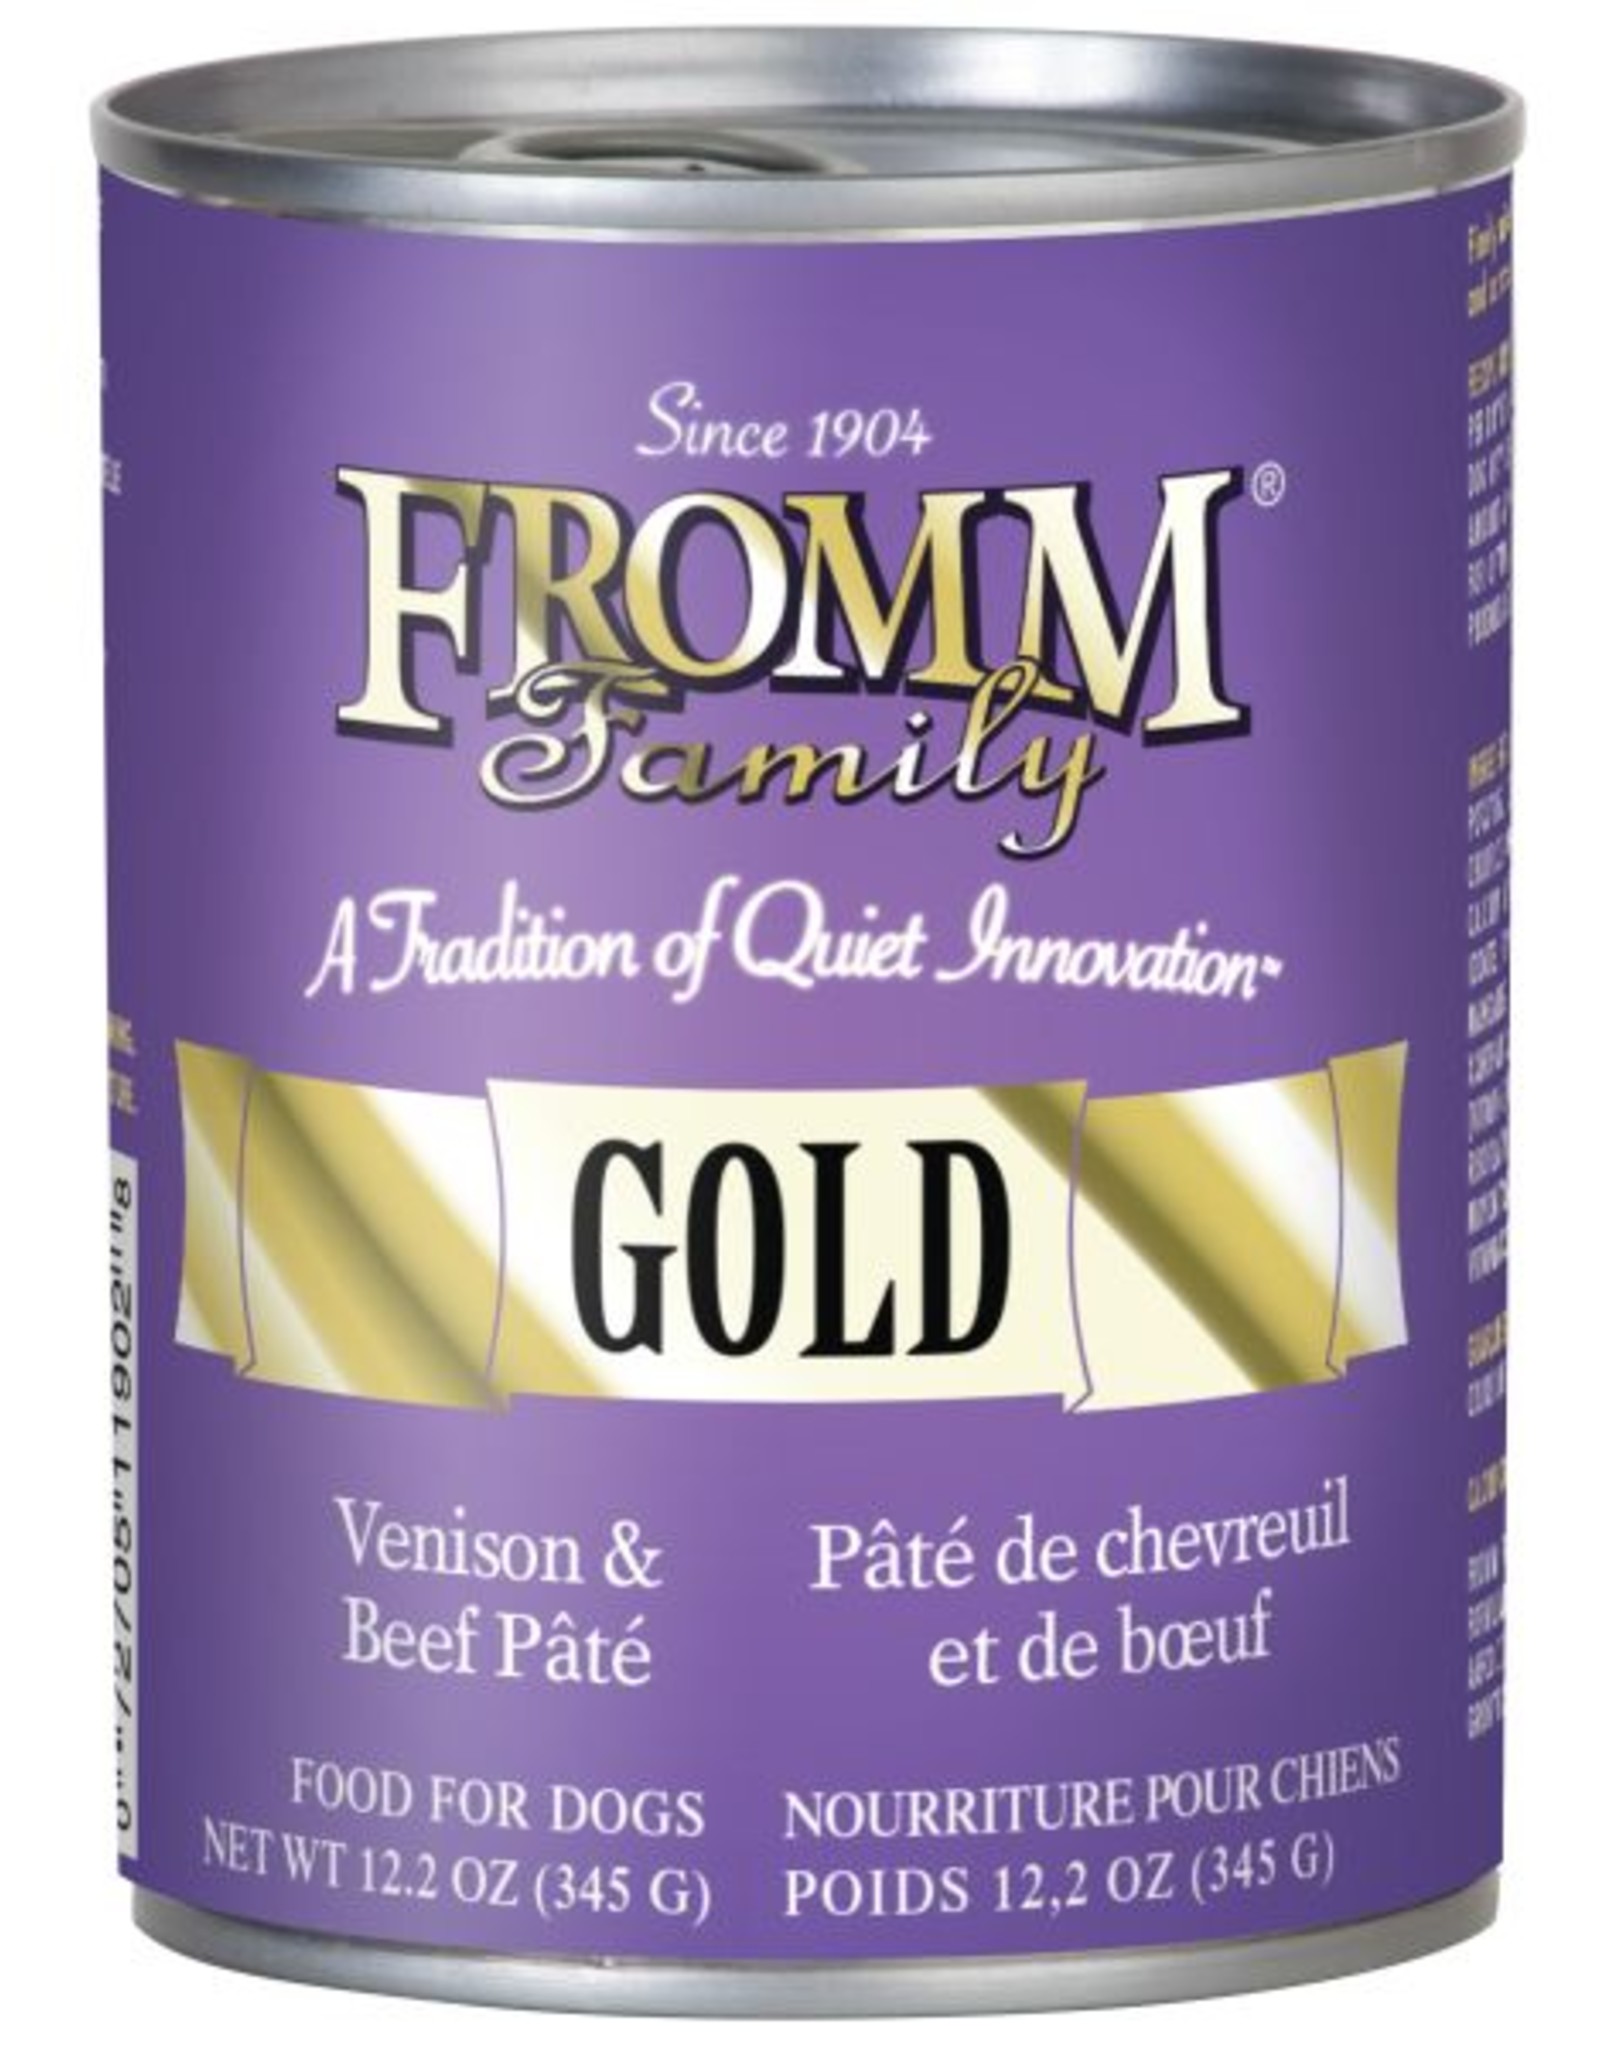 Fromm Fromm Gold Venison & Beef Pate Canned Dog Food